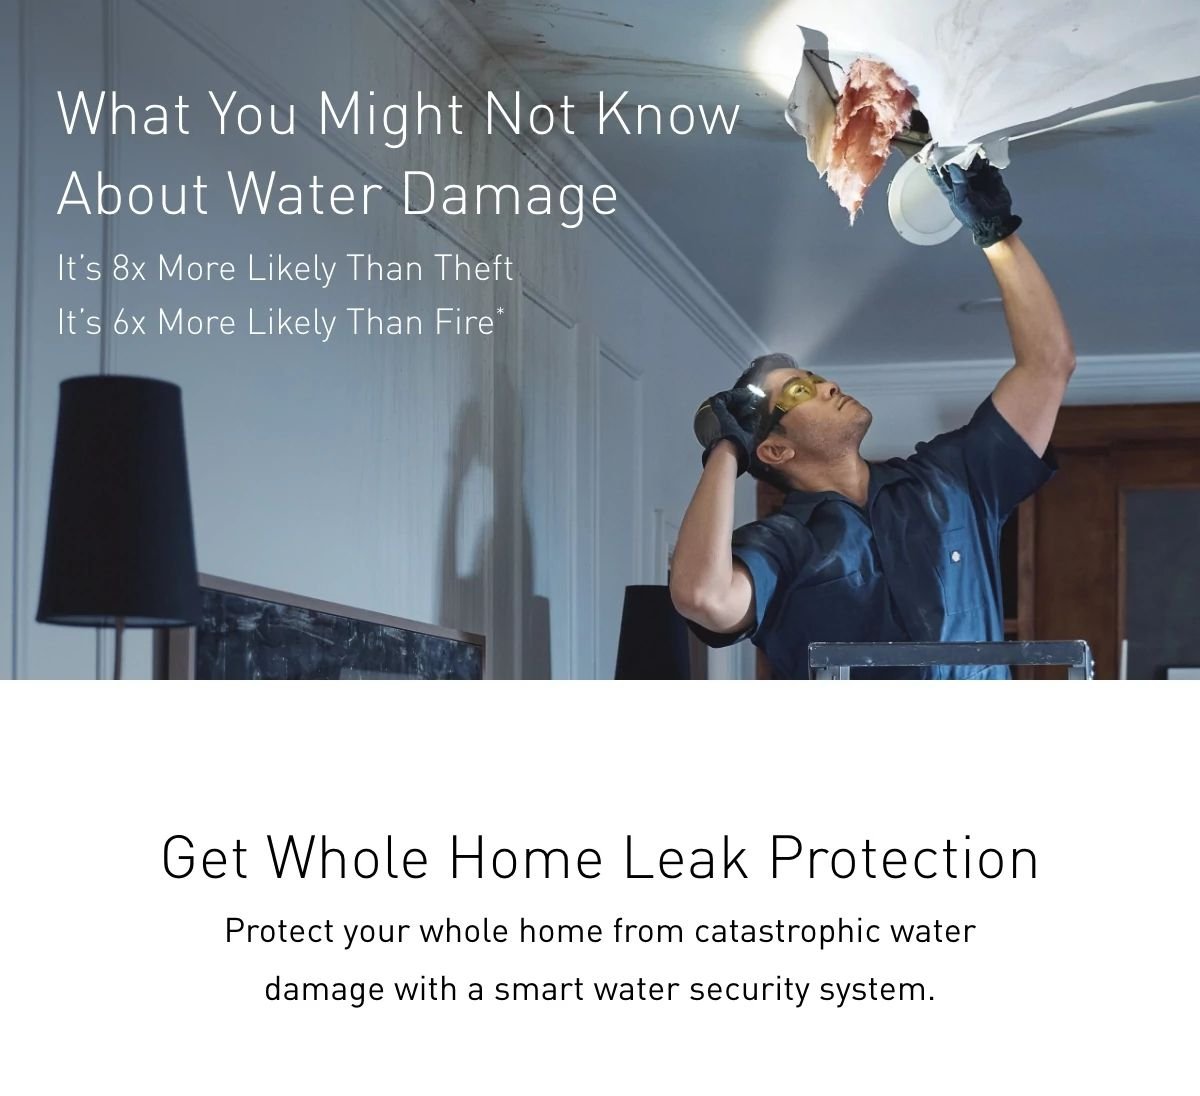 Get Whole Home Leak Protection